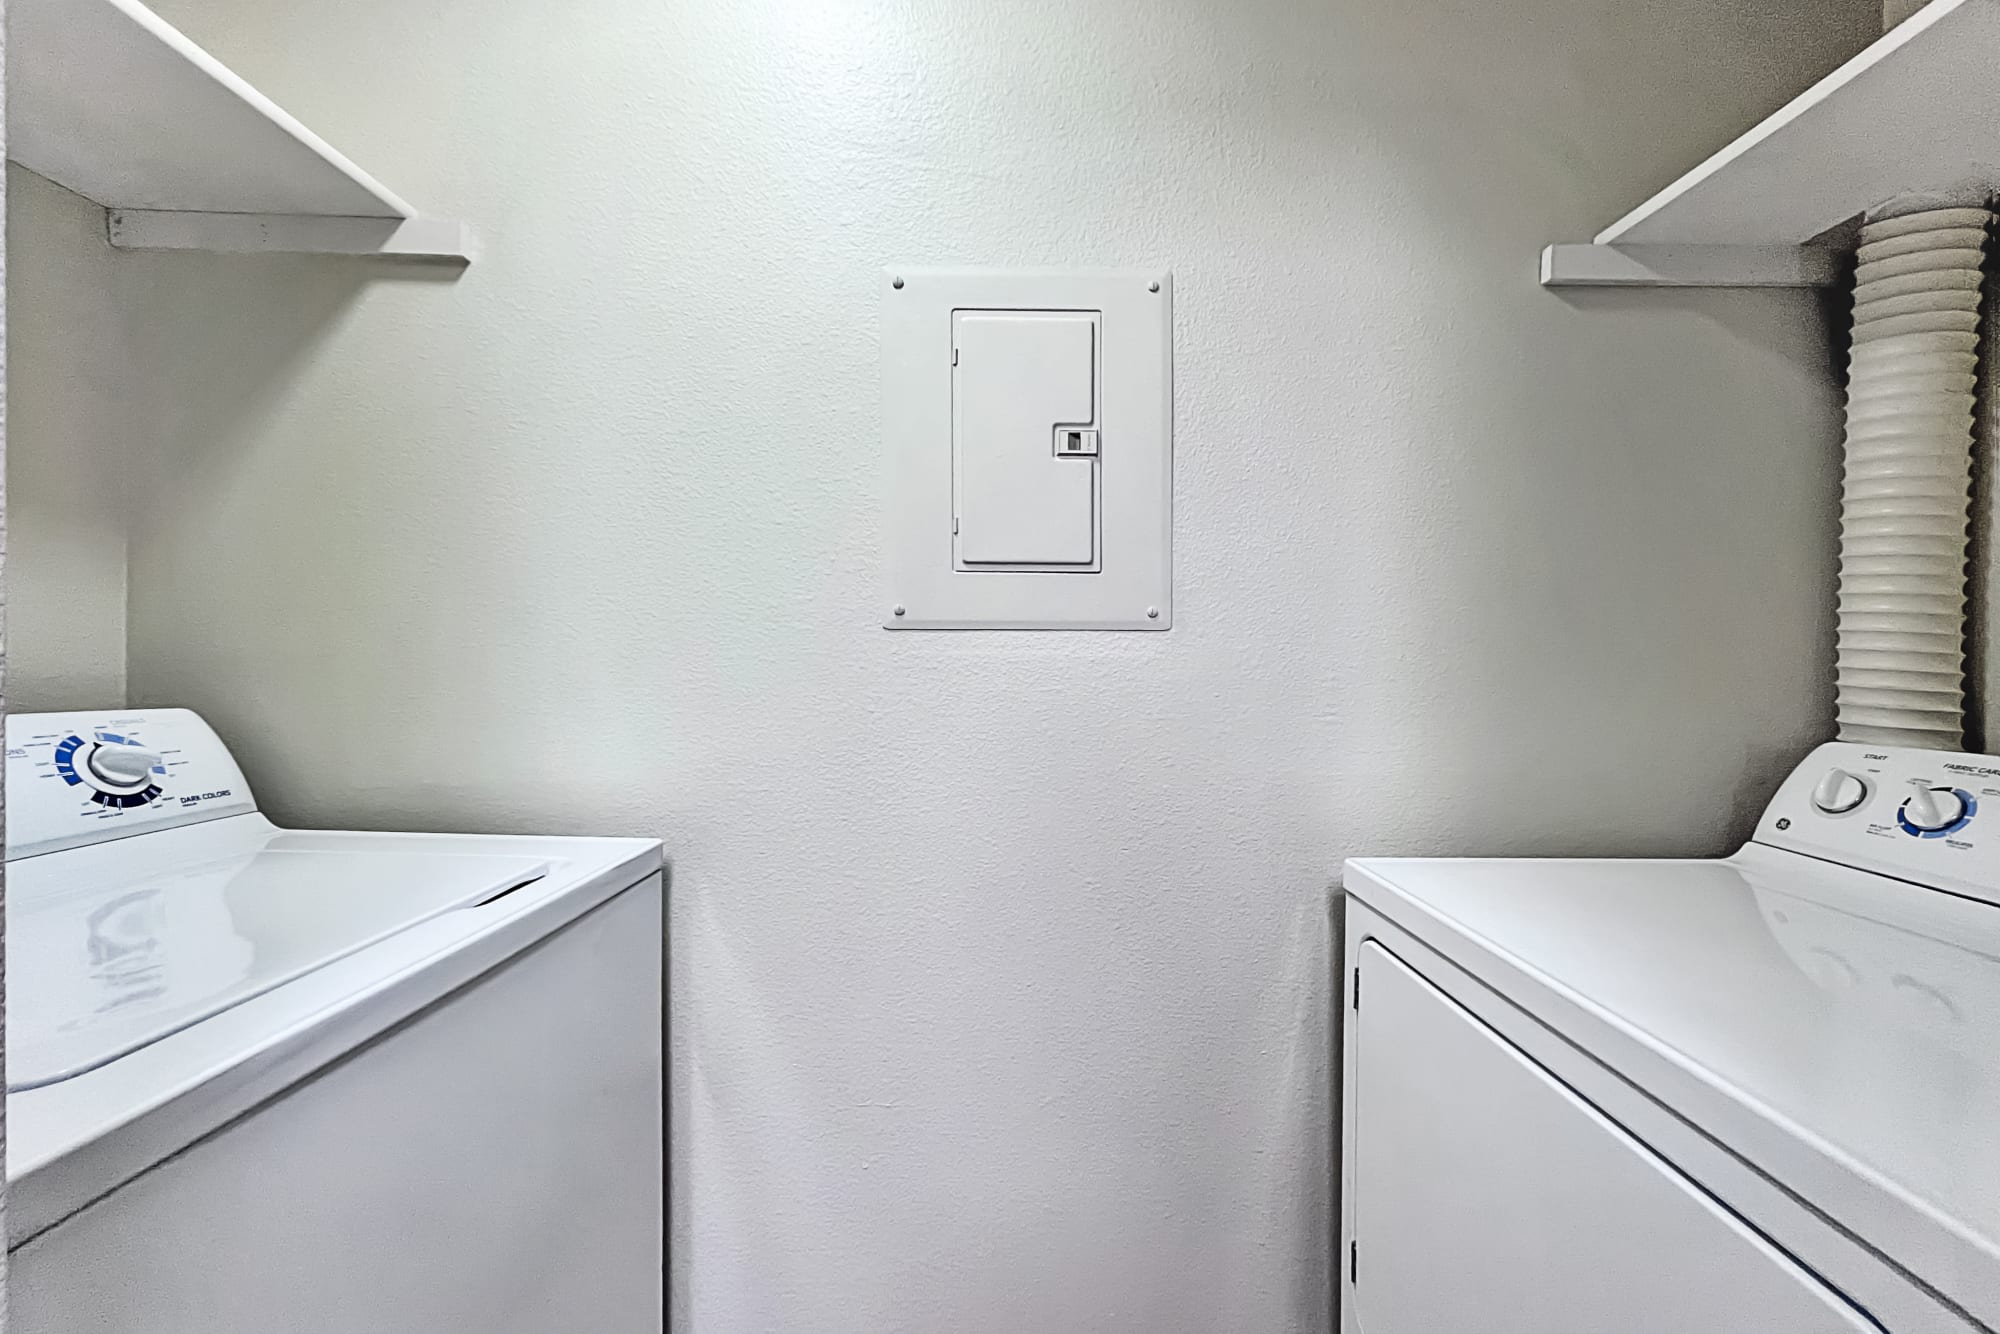 Washer and dryer at Newport Crossing Apartments in Newcastle, Washington